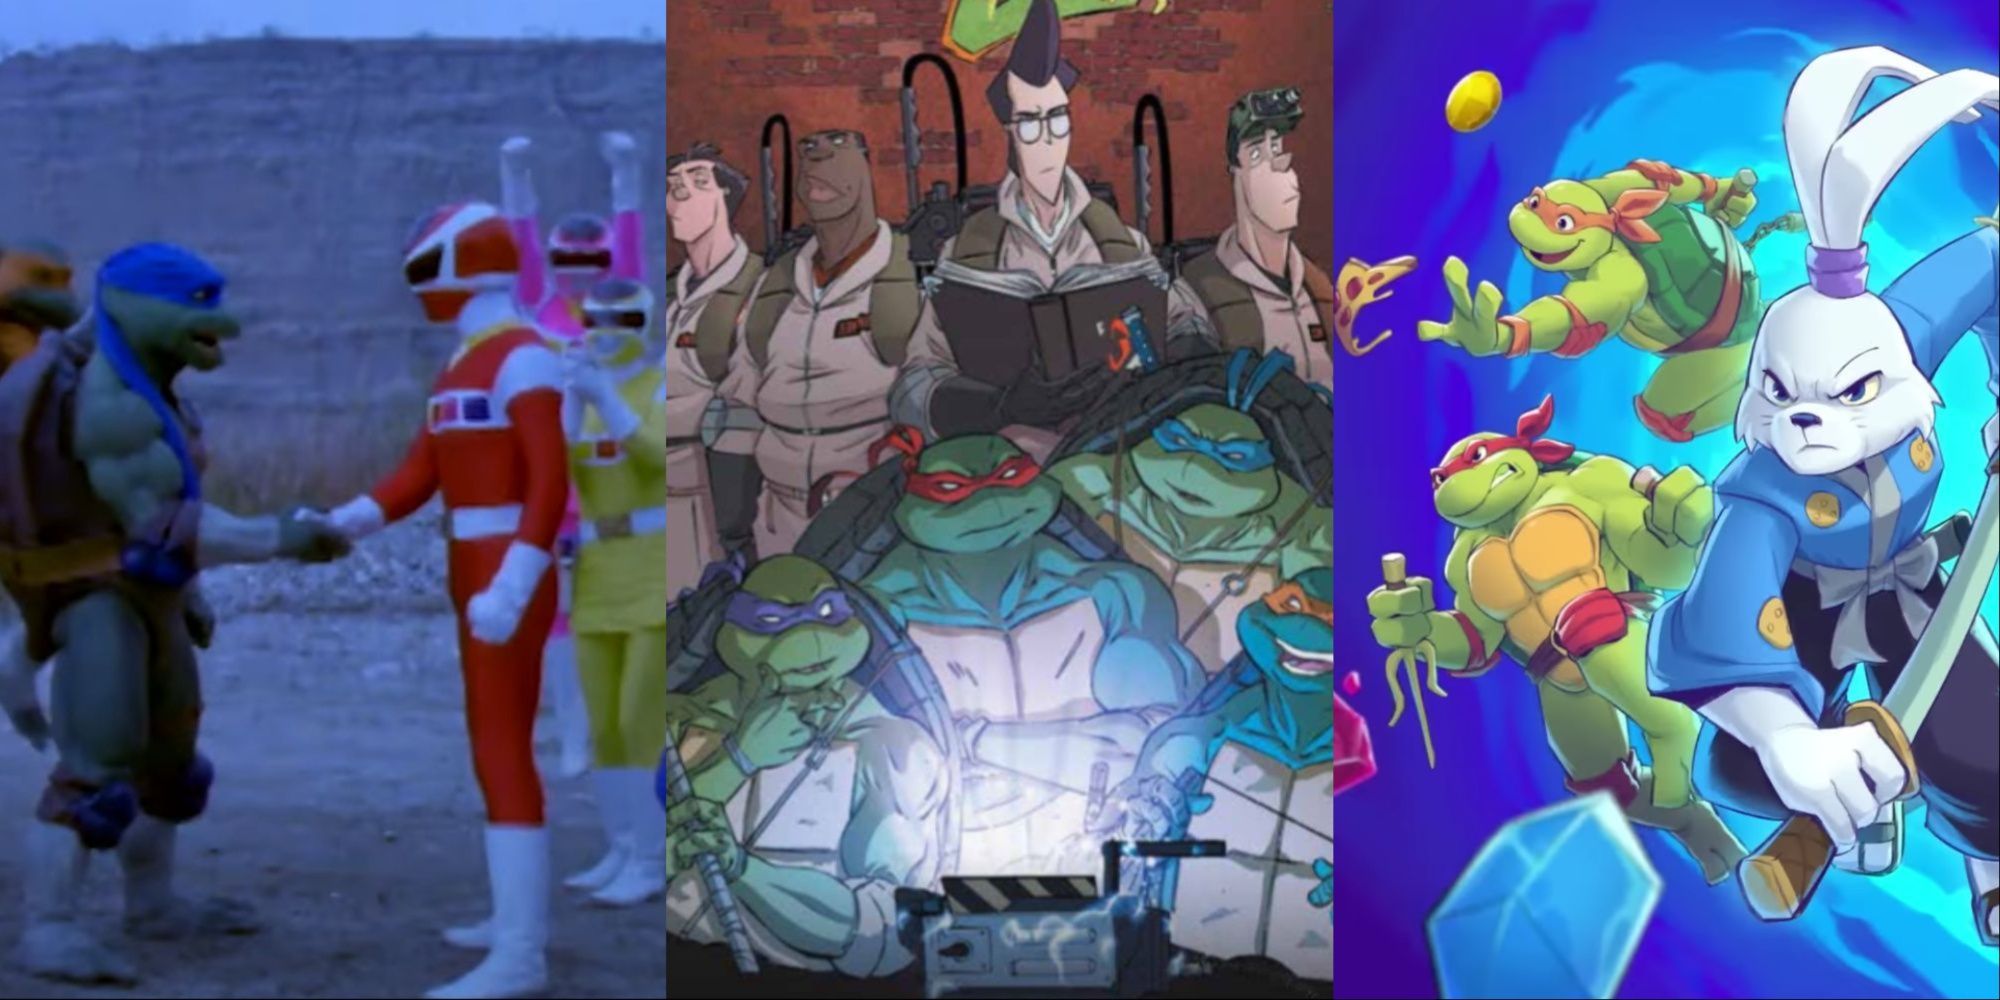 Collage of Leo and the Red Ranger shaking hands, the cover of an issue of Ghostbusters and TMNT, and the character Miyamoto Usagi in the DLC promo art for Shredder's Revenge.